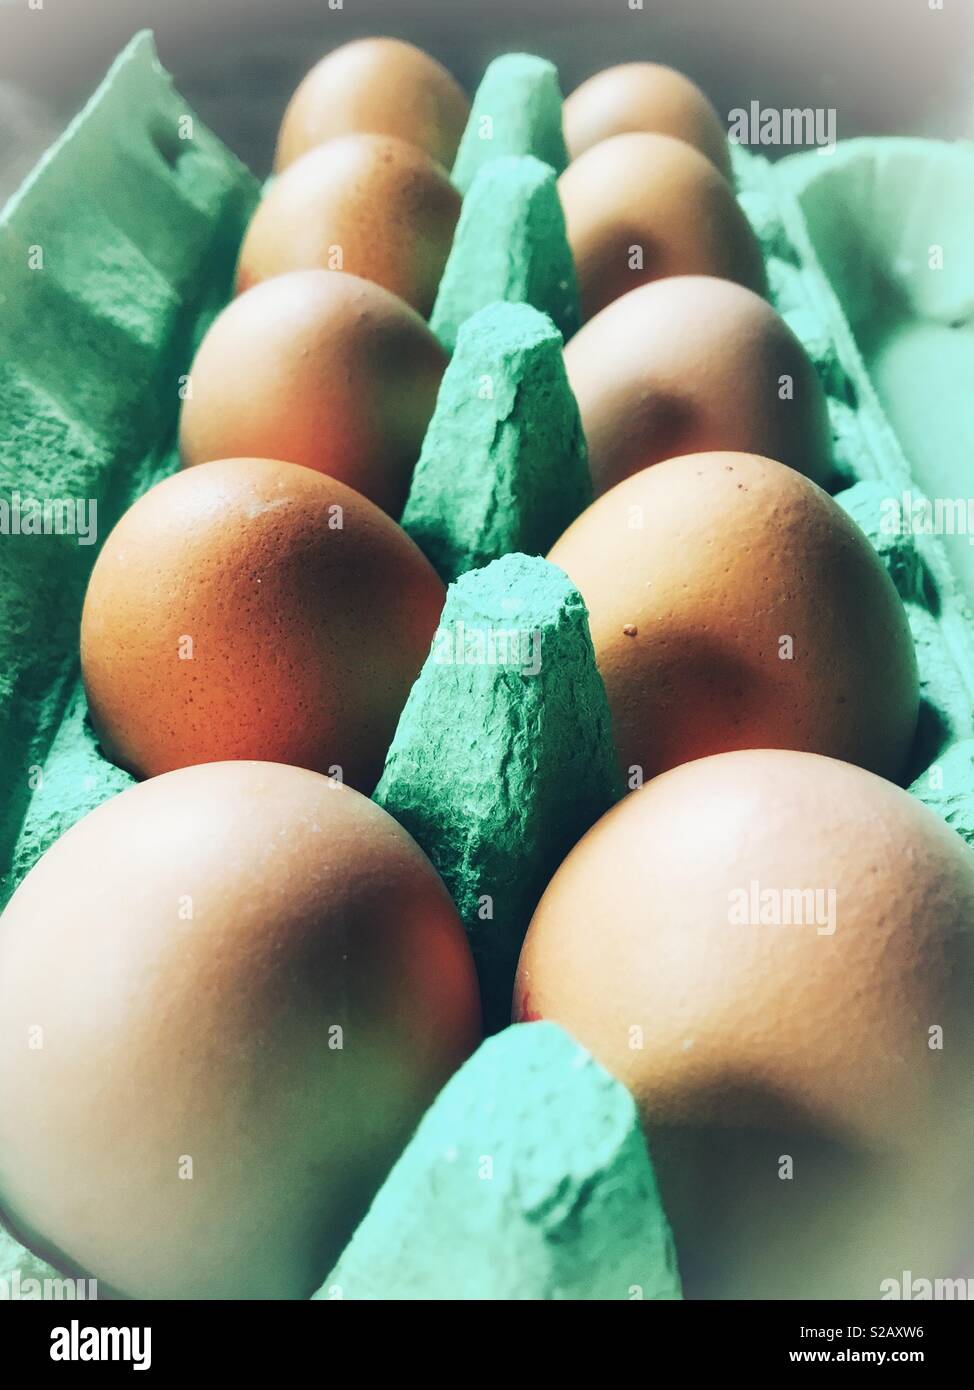 Eggs in a green box Stock Photo